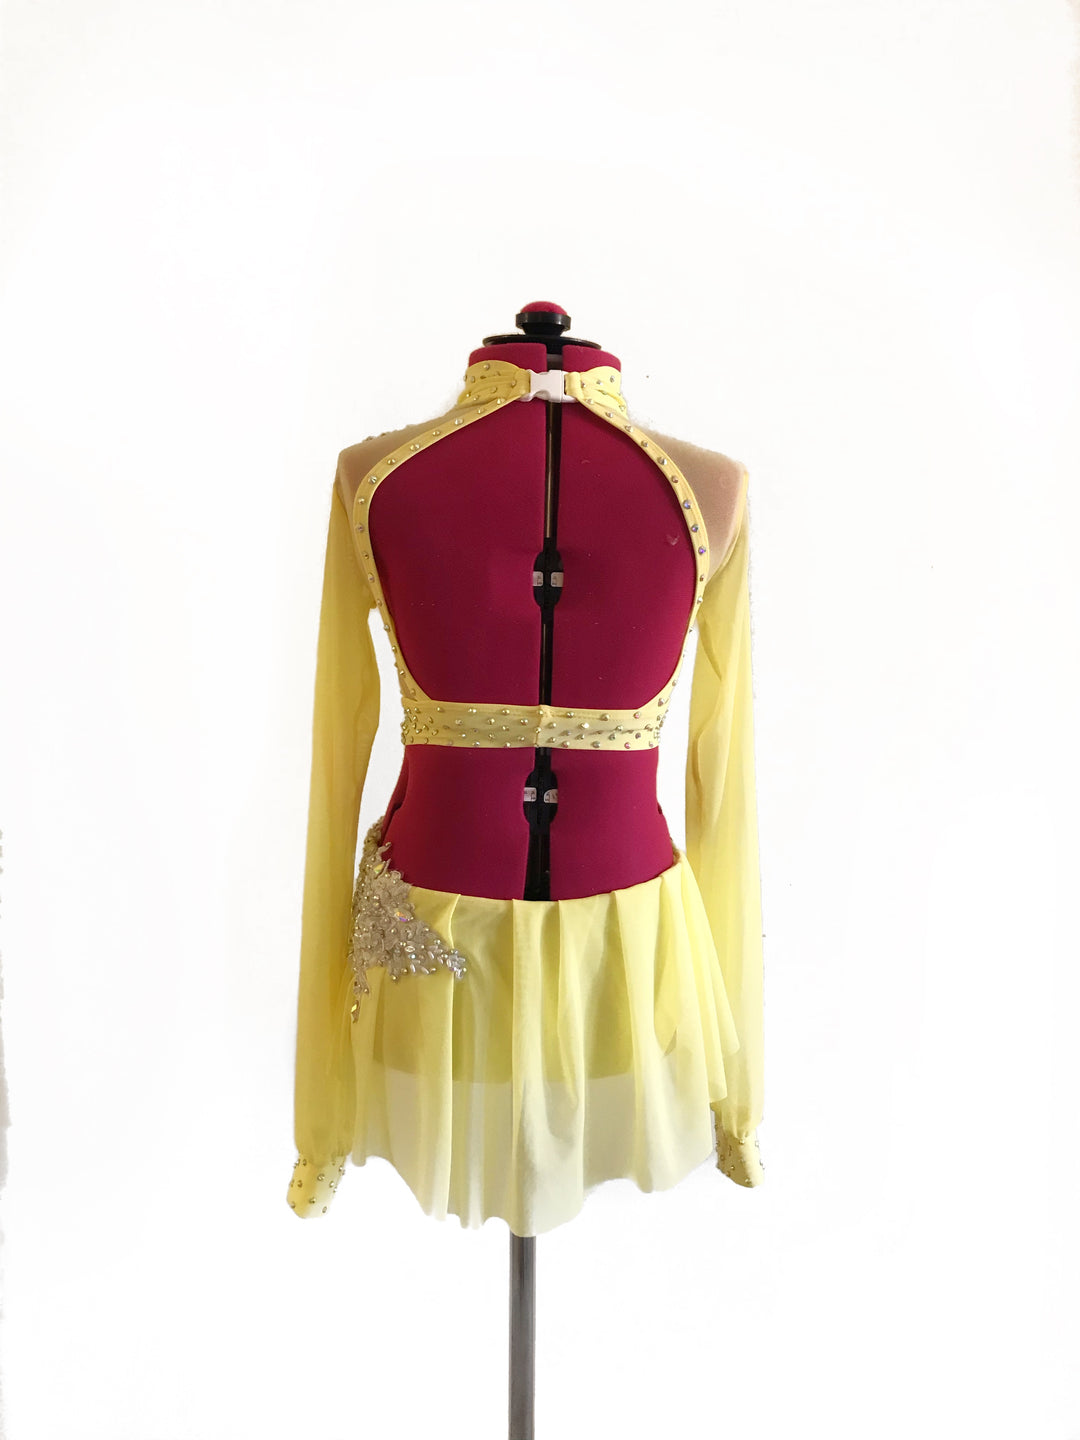 CHILD LARGE pale yellow lyrical/contemporary ready-to-ship costume